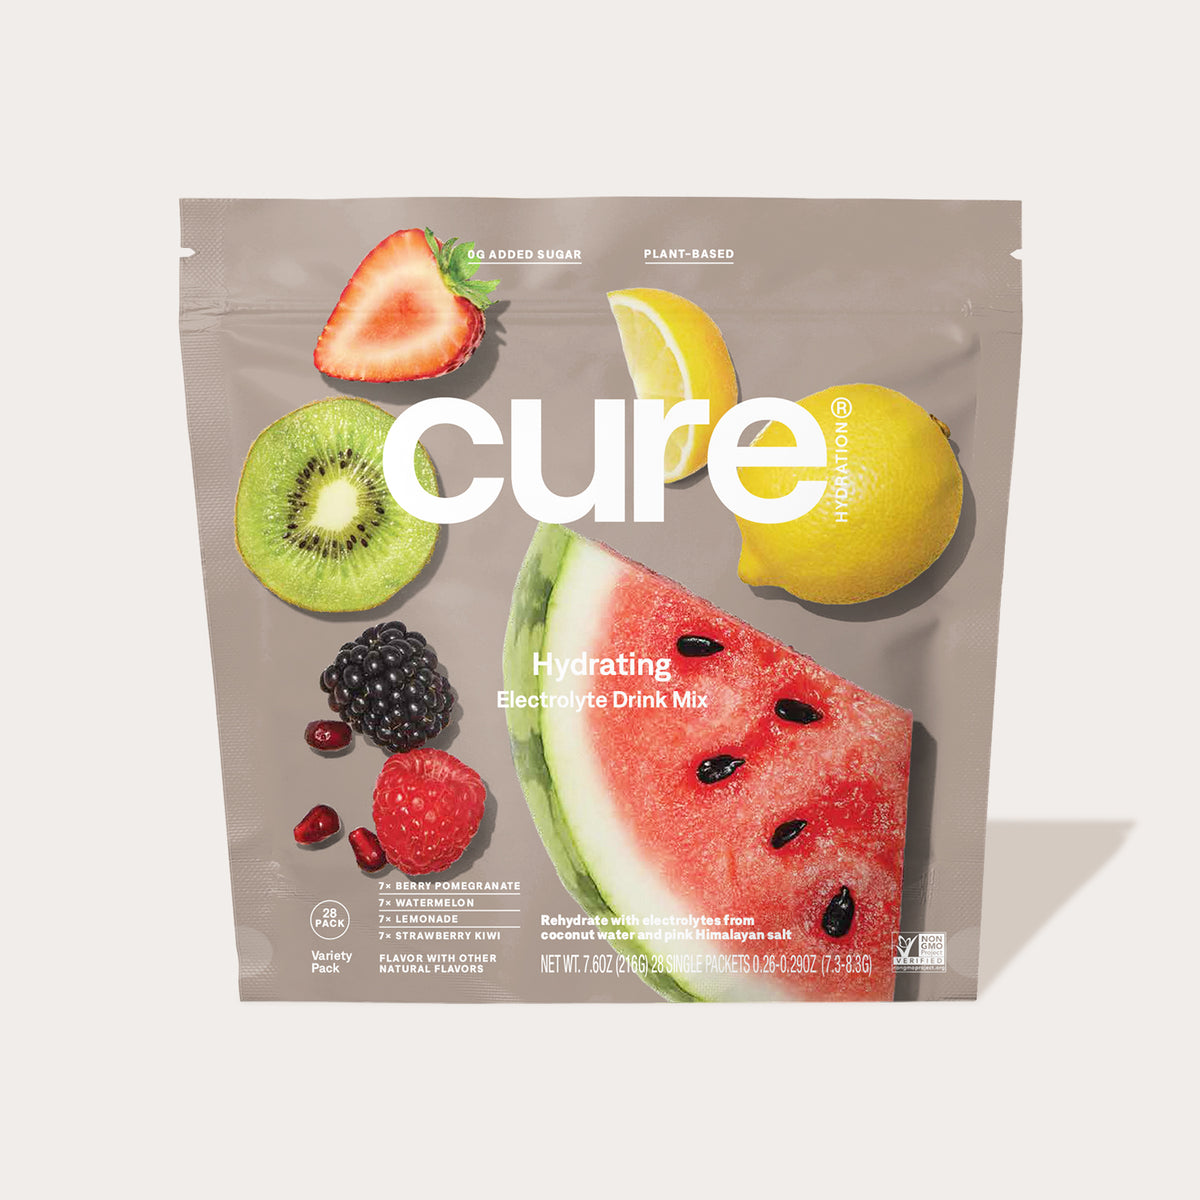 Variety pack of 'Cure' electrolyte drink mixes with fruits.